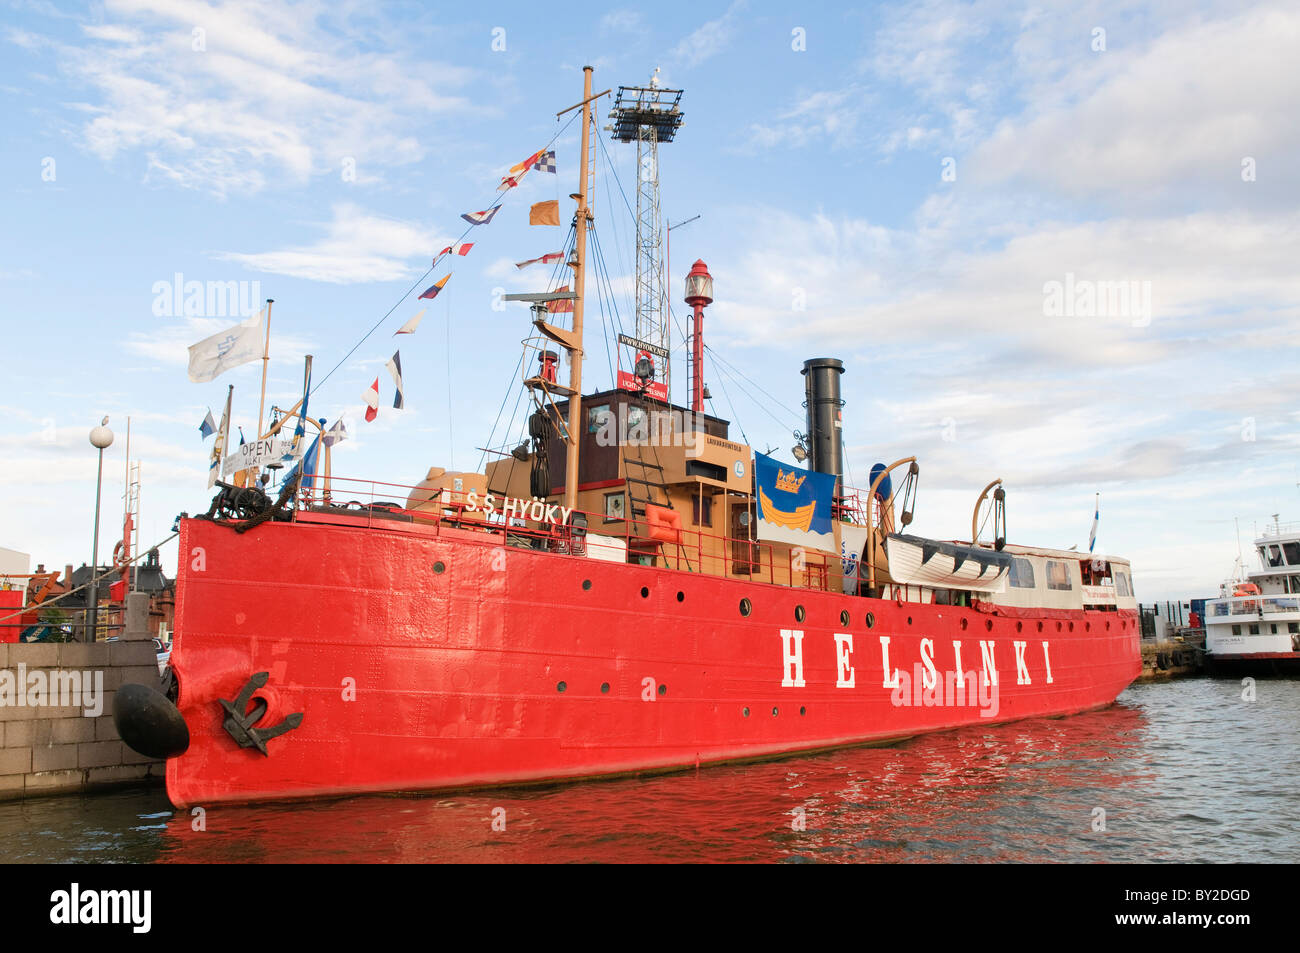 The old lightship 'Hyoky' in Helsinki harbour, Finland. Stock Photo